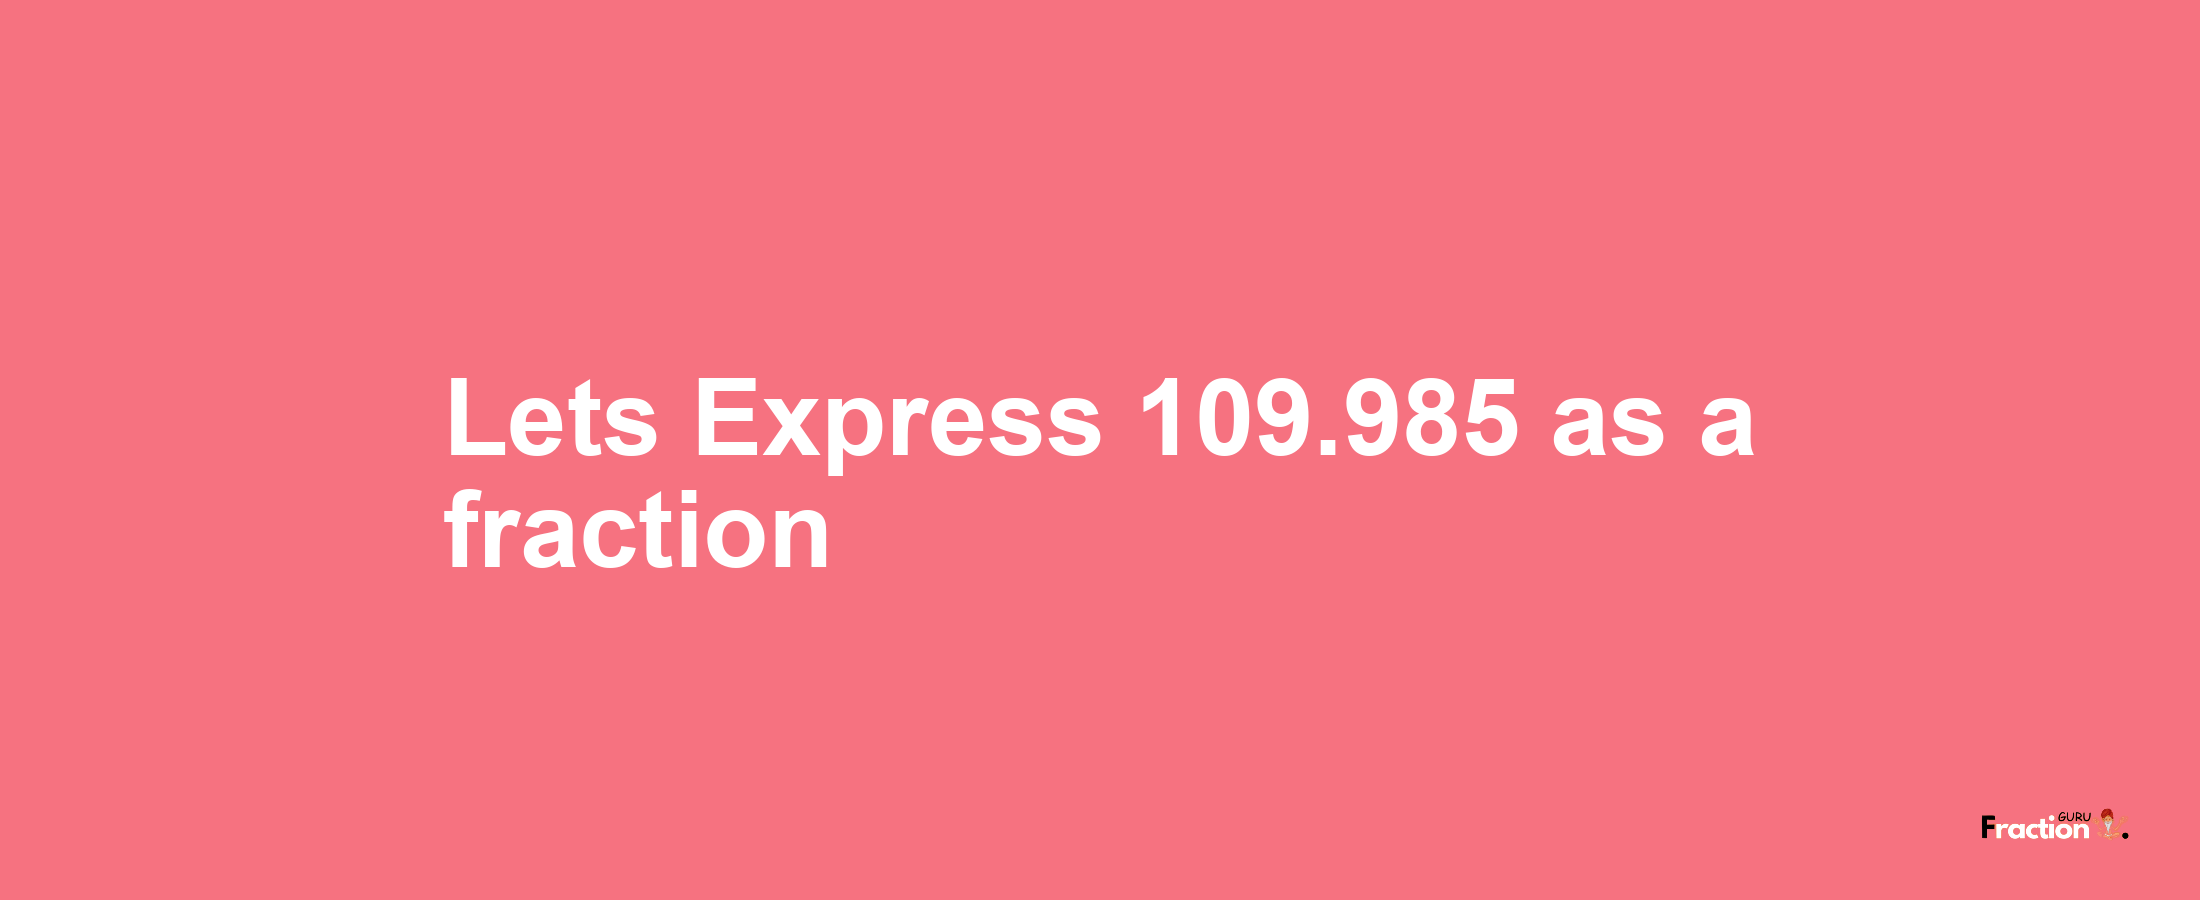 Lets Express 109.985 as afraction